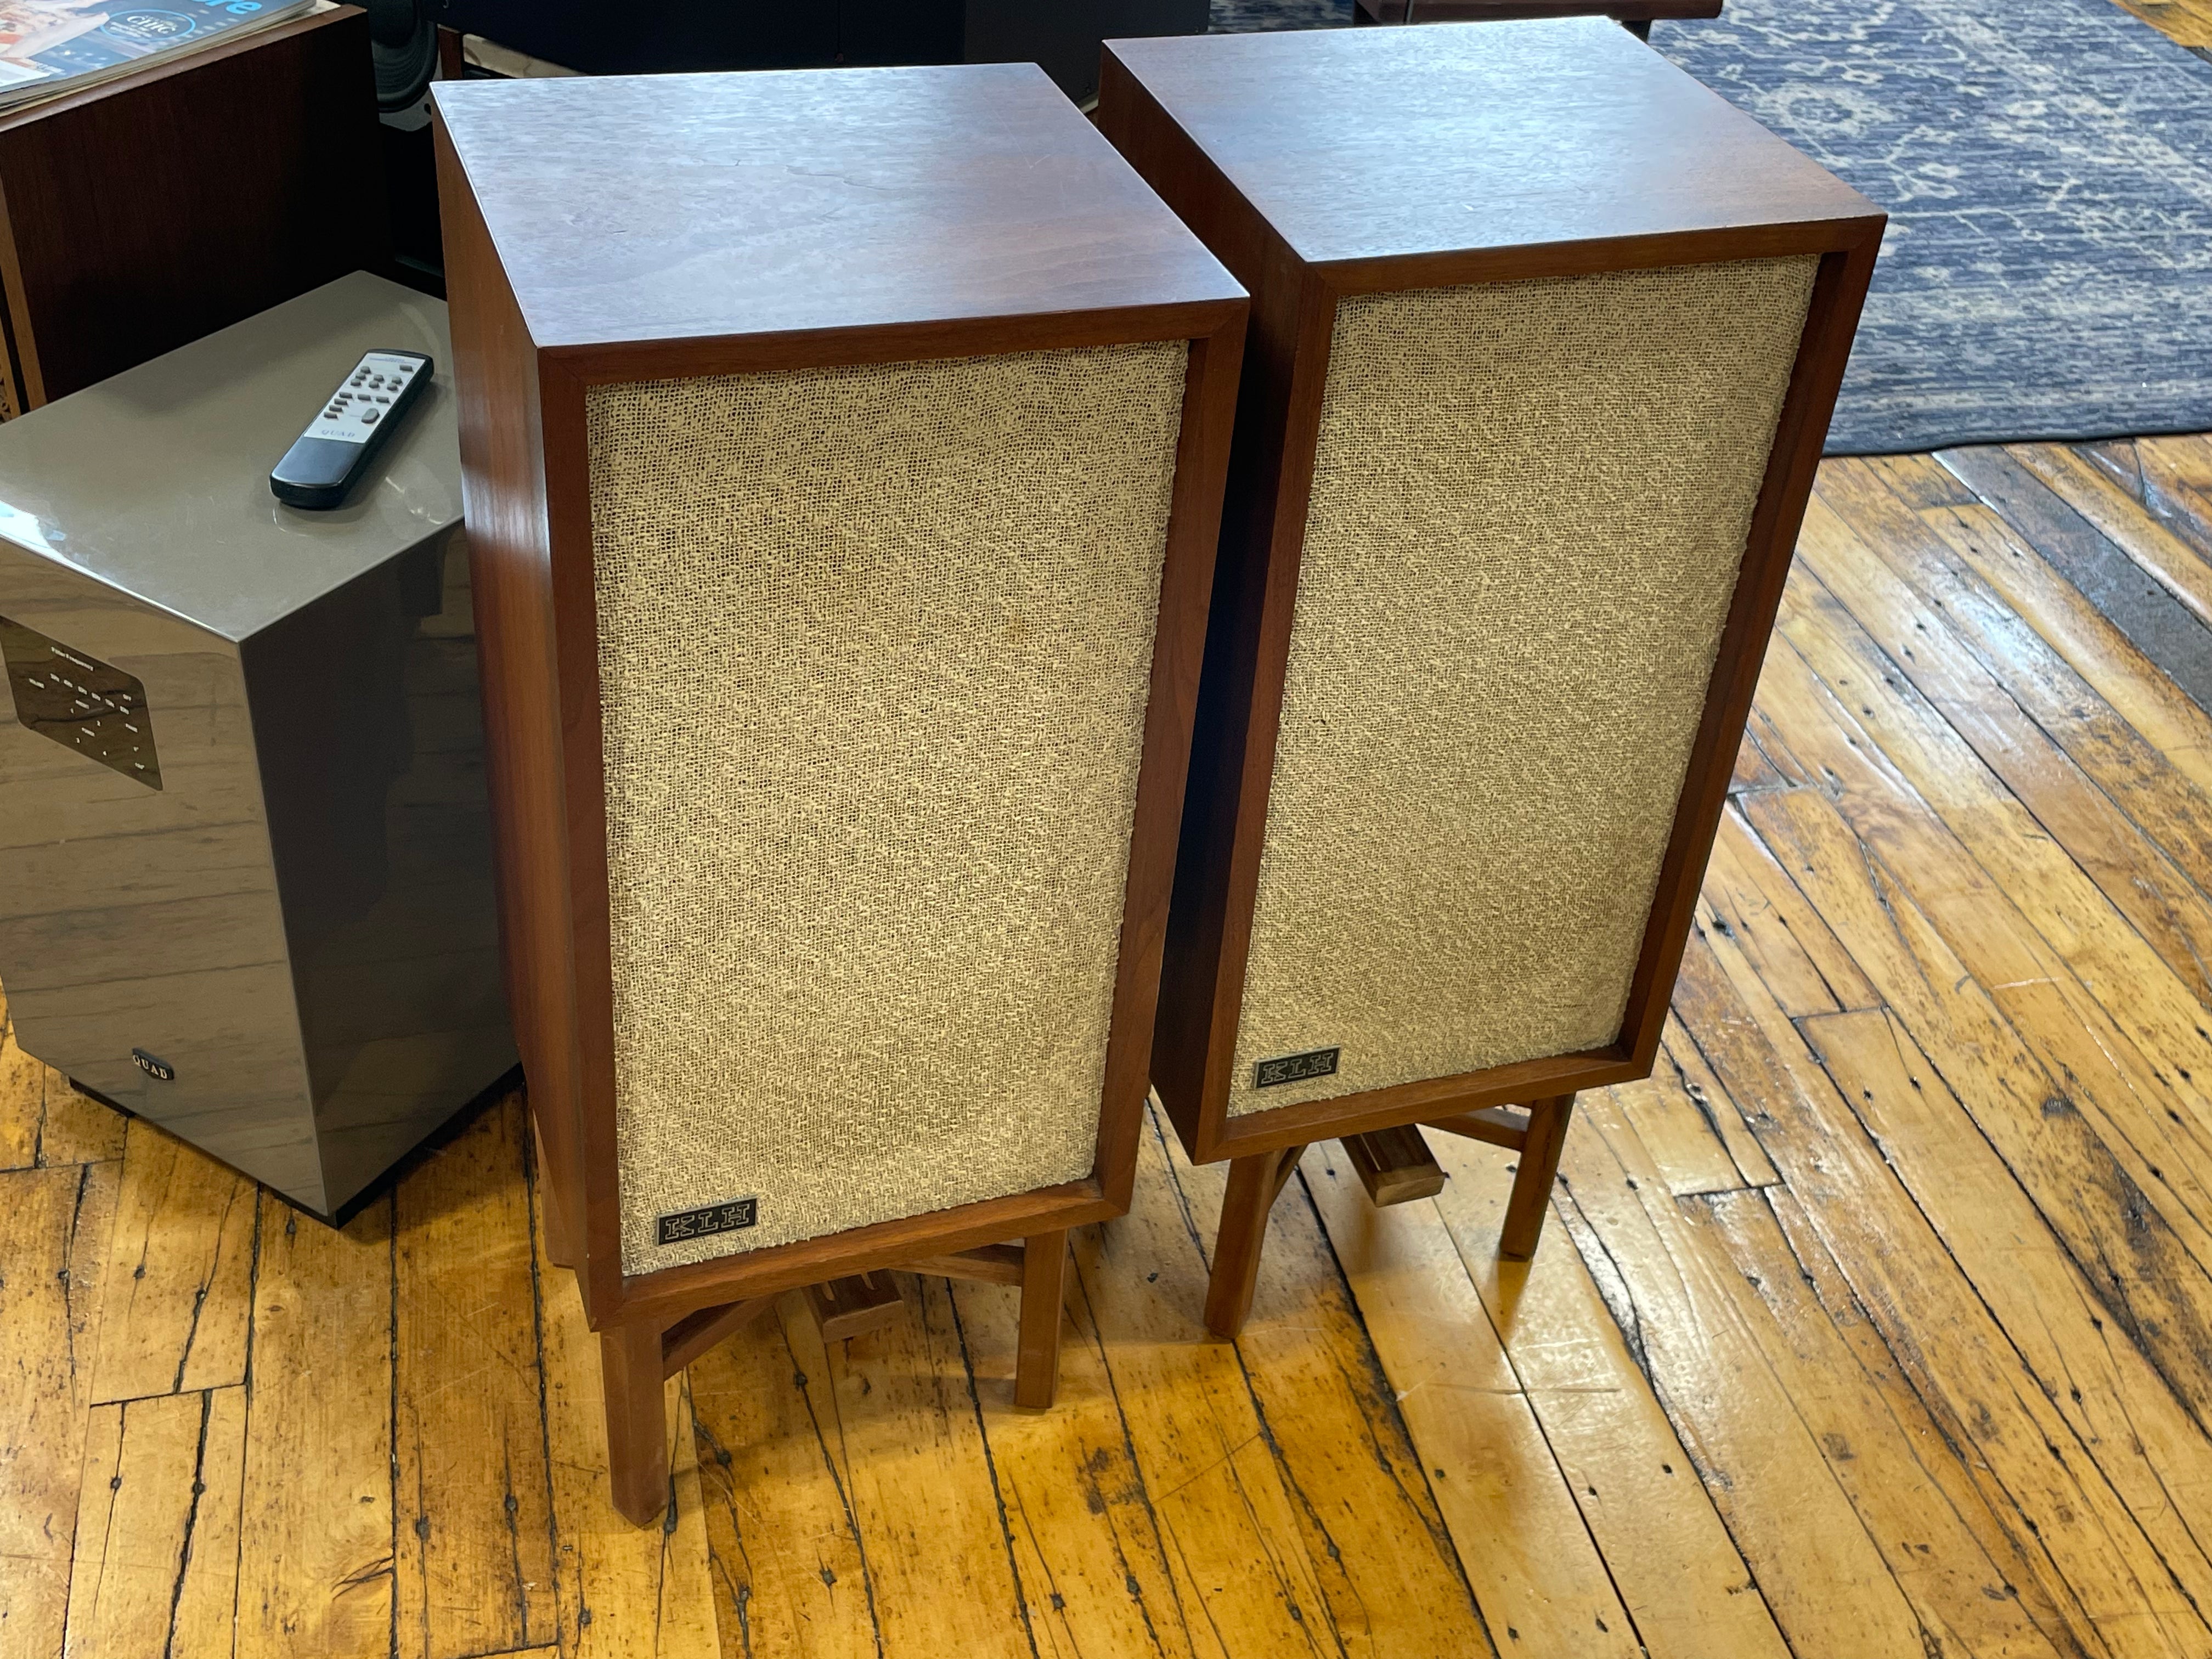 KLH Six - Exceptional Condition!